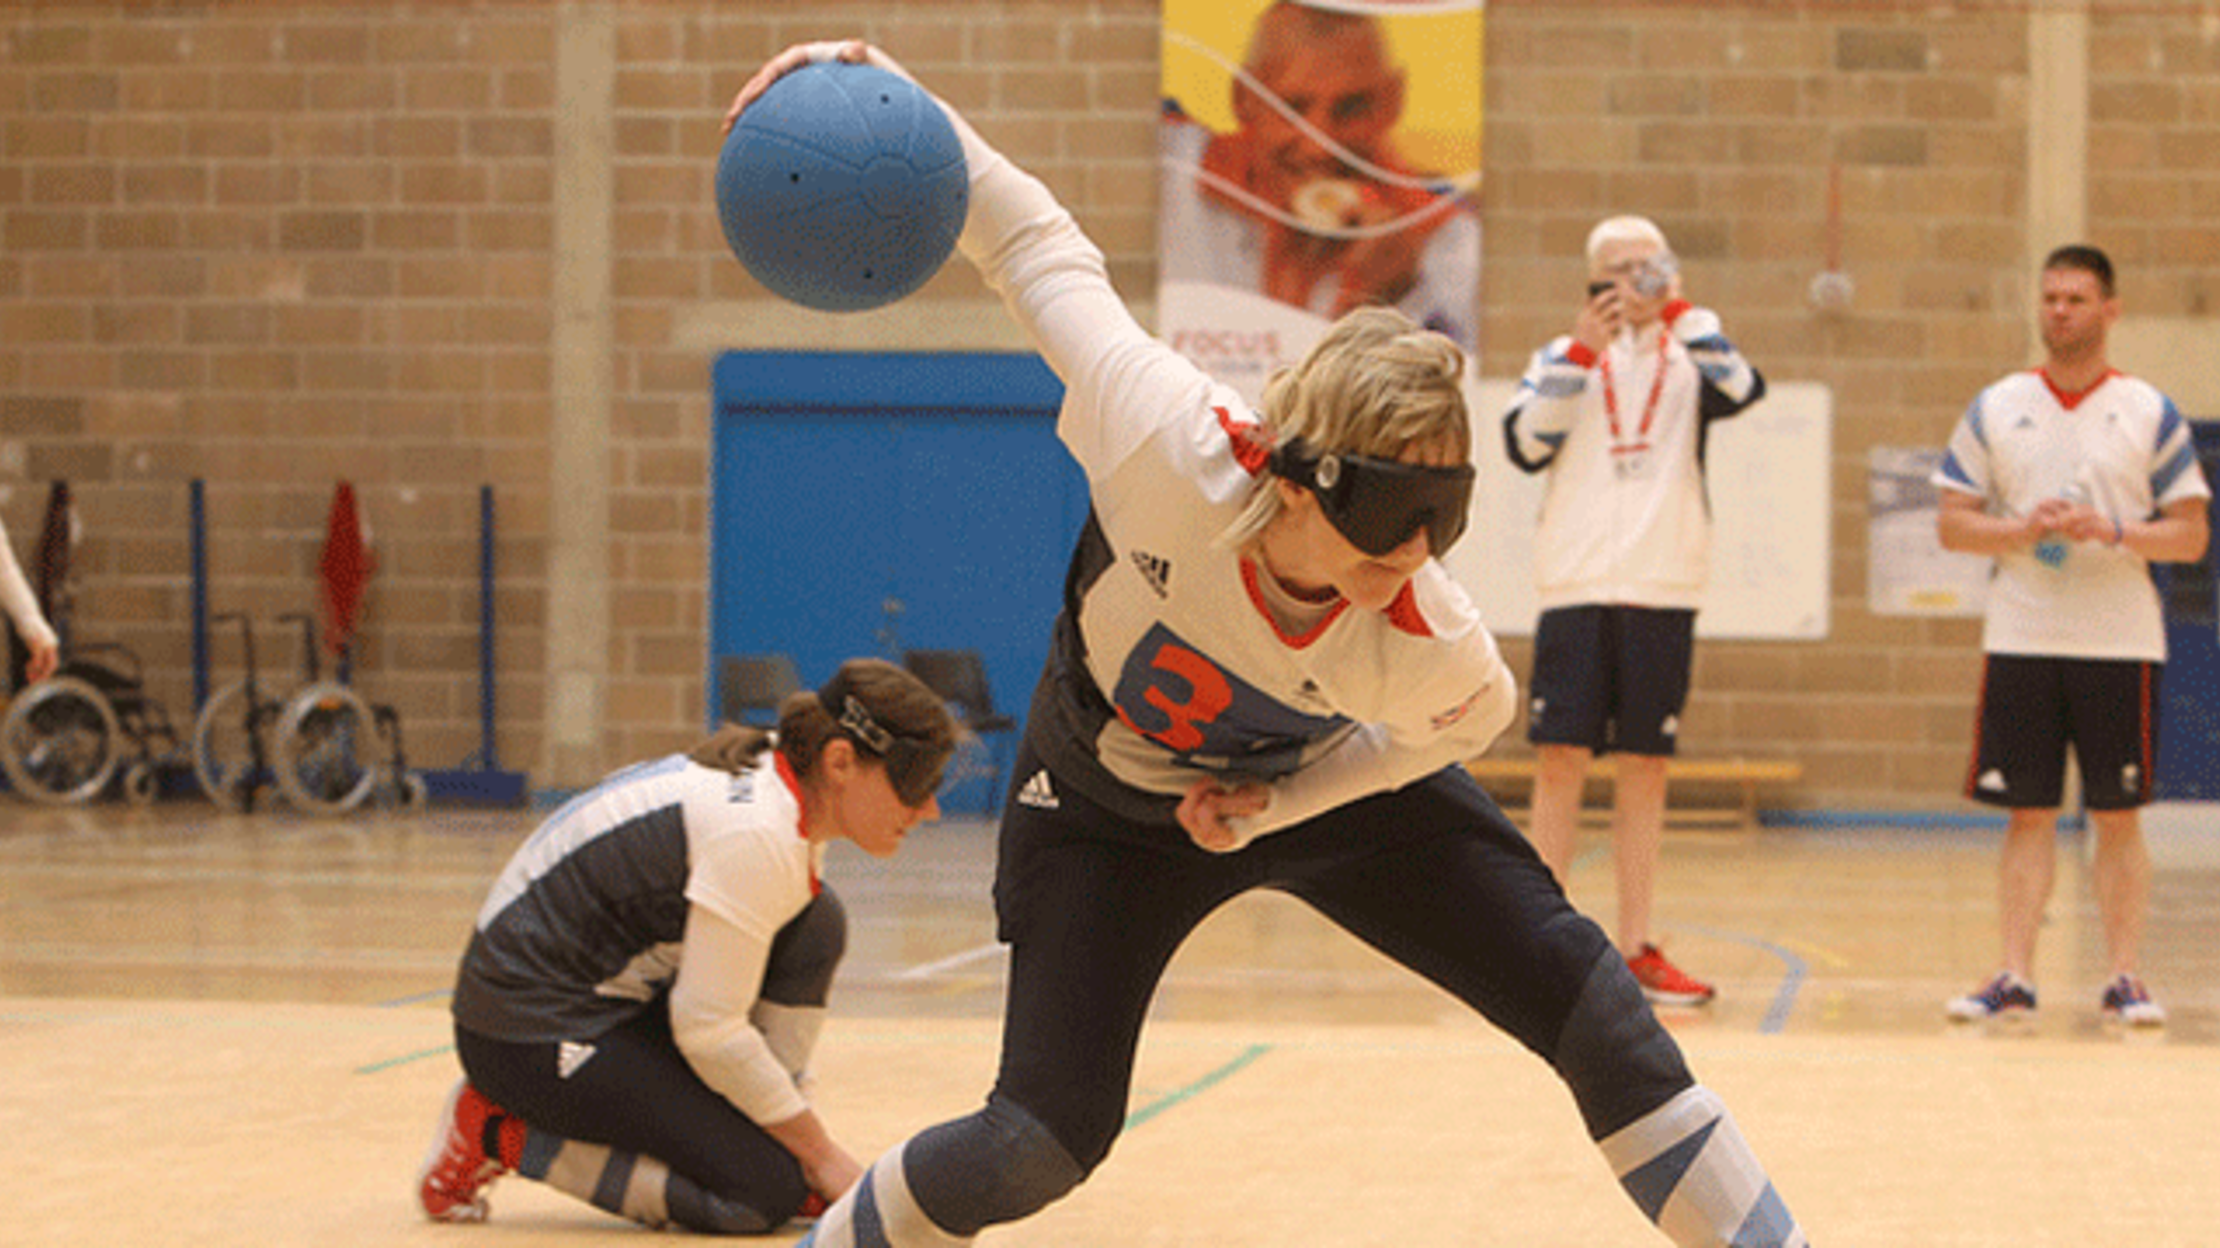 Goalball A Sport For Blind And Visually Impaired Athletes Mental Floss